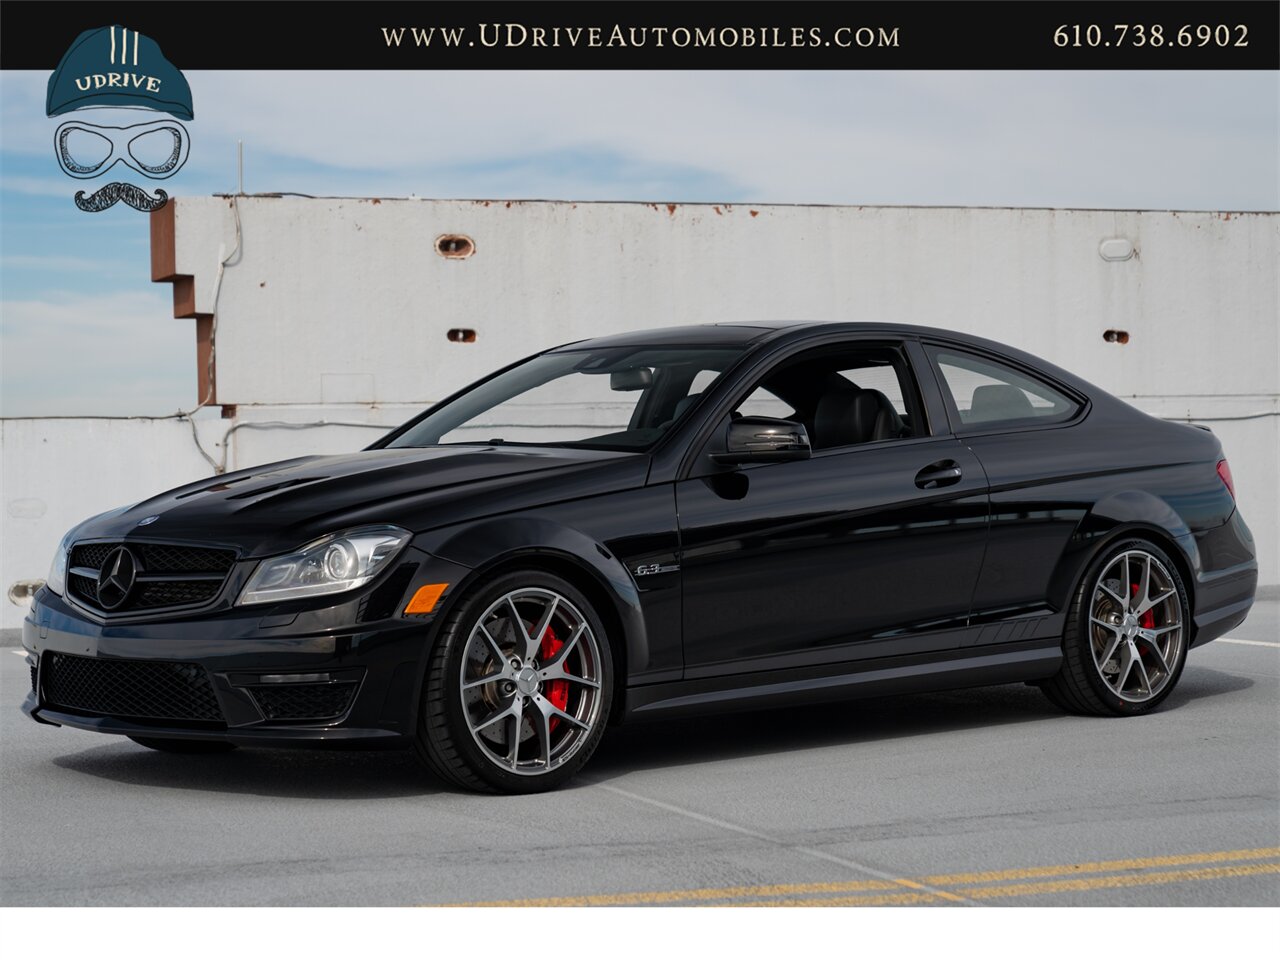 2015 Mercedes-Benz C63 AMG  Edition 507 17k Miles Pano Sunroof Locking Diff 507hp - Photo 11 - West Chester, PA 19382